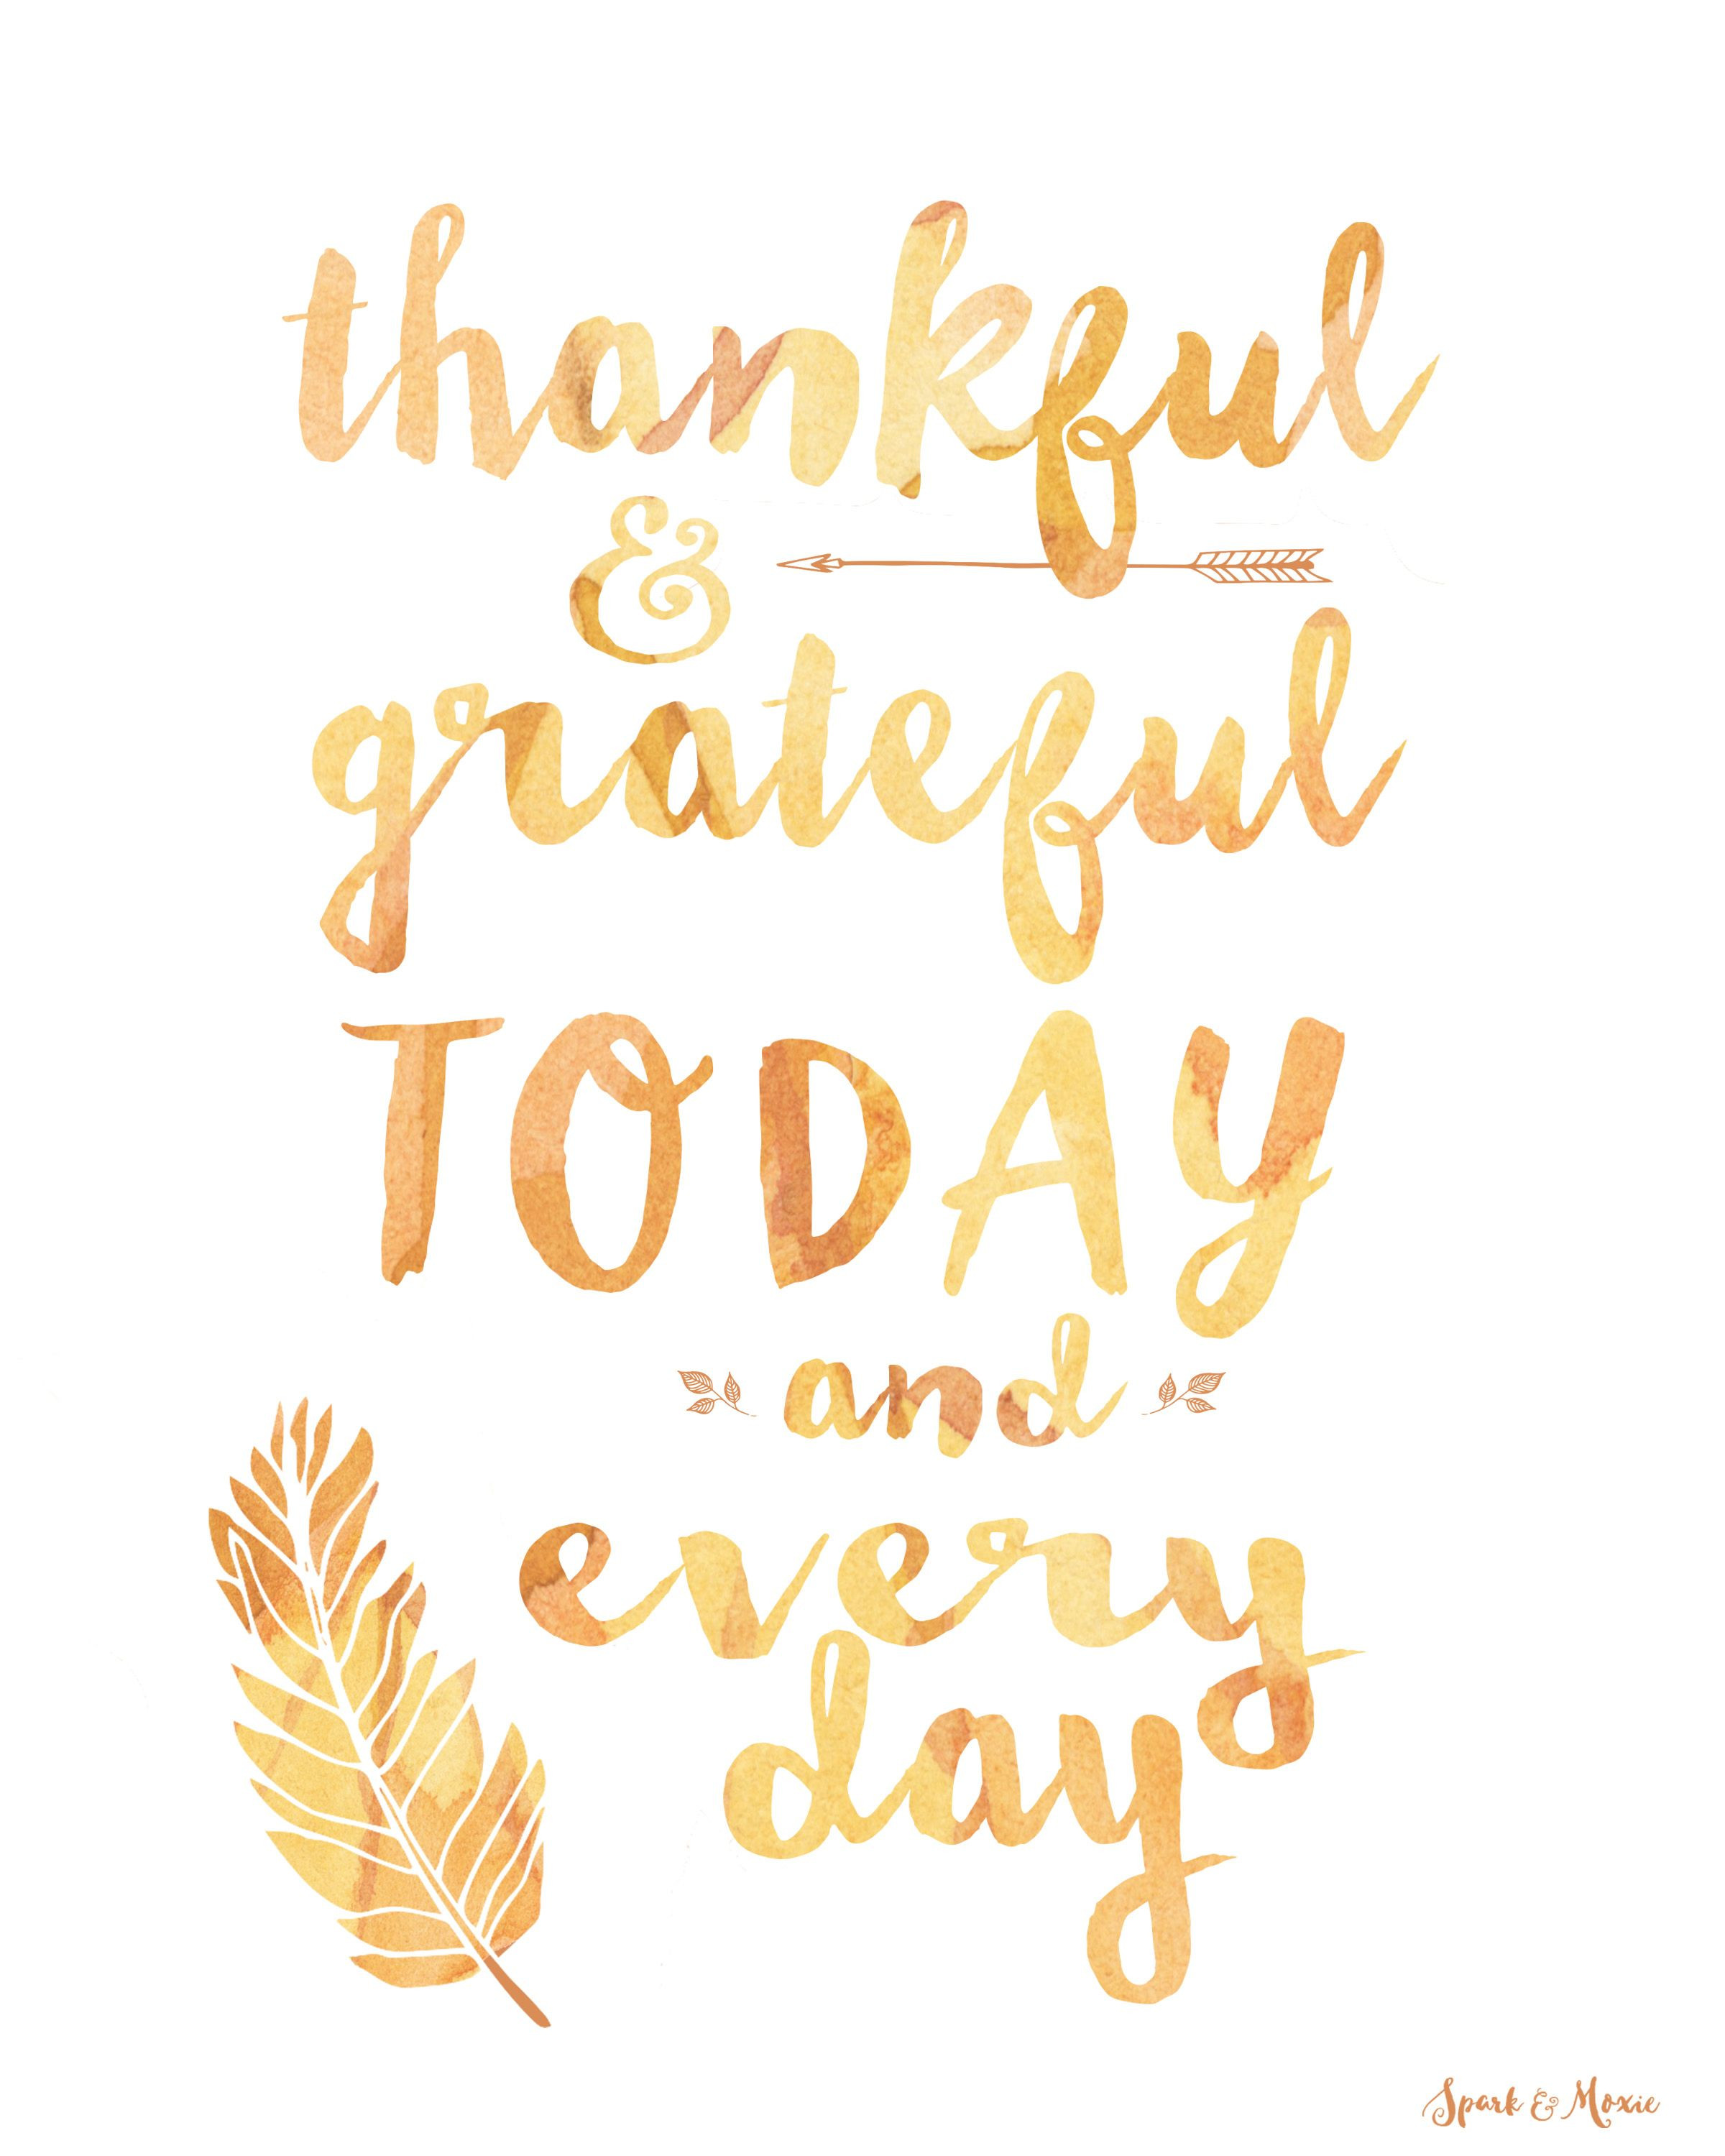 Quotes Of Thanksgiving
 17 Funny Happy Thanksgiving Quotes for Friends and